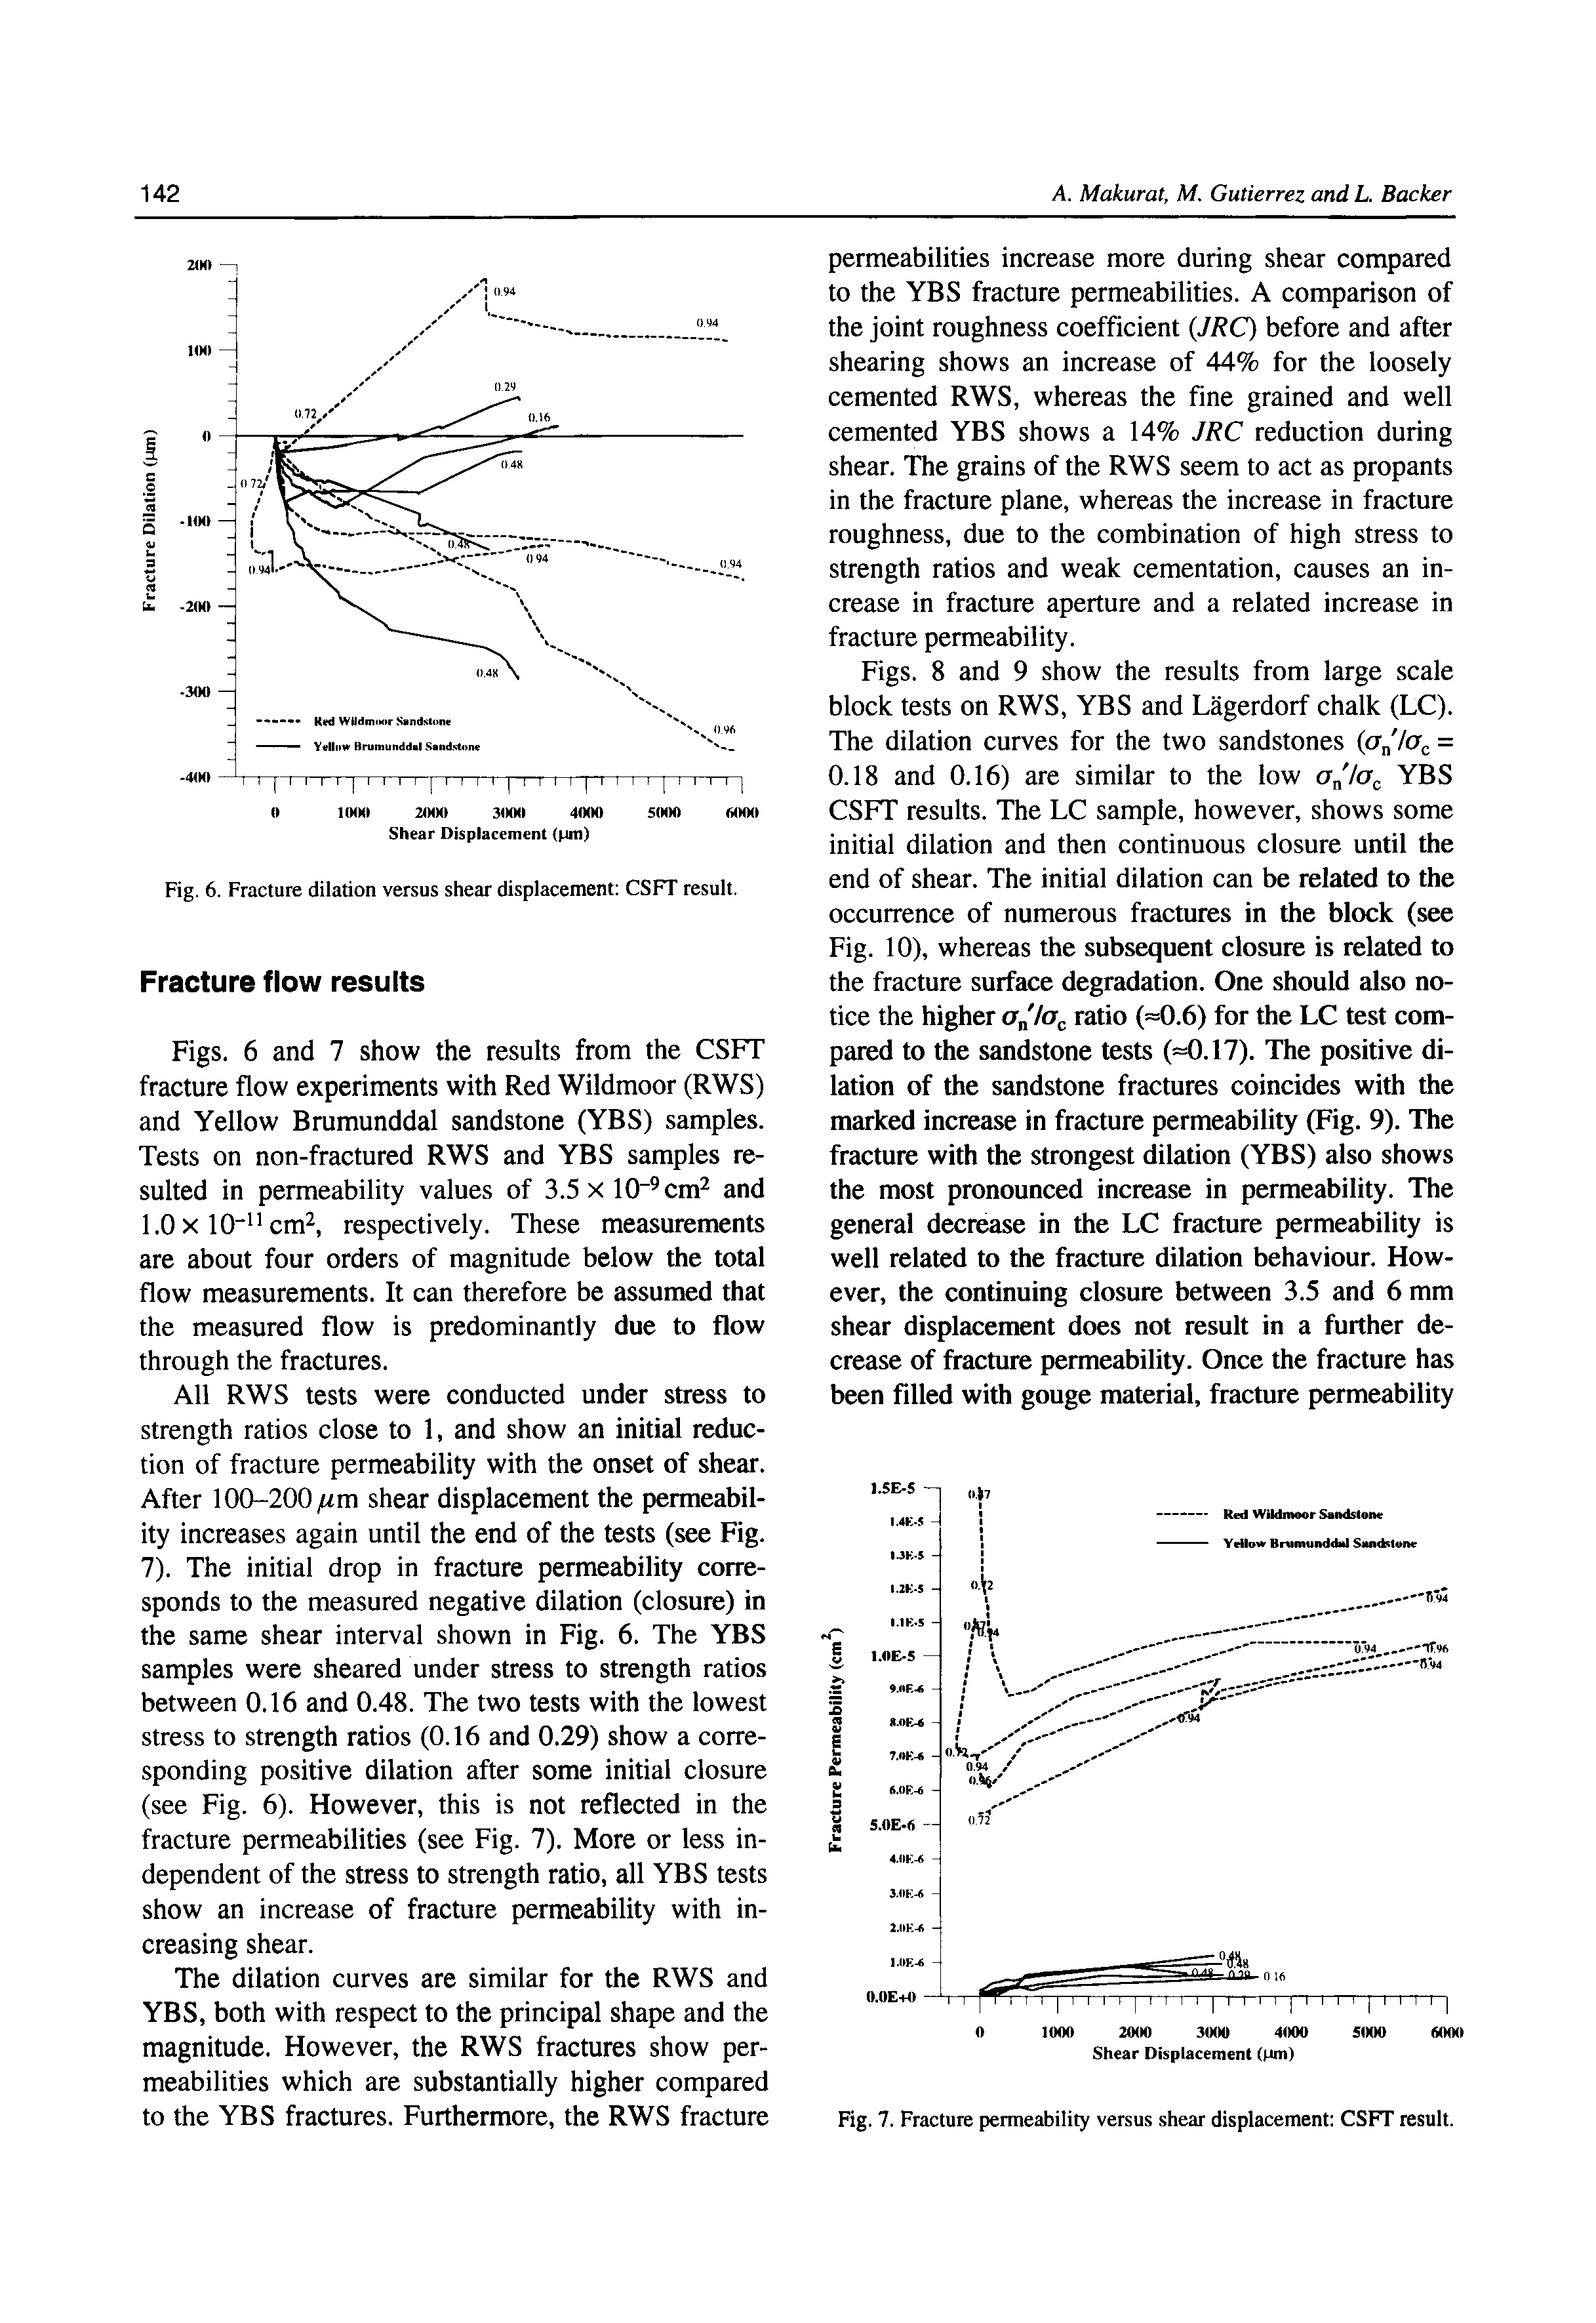 Fig. 7. Fracture permeability versus shear displacement CSFT result.